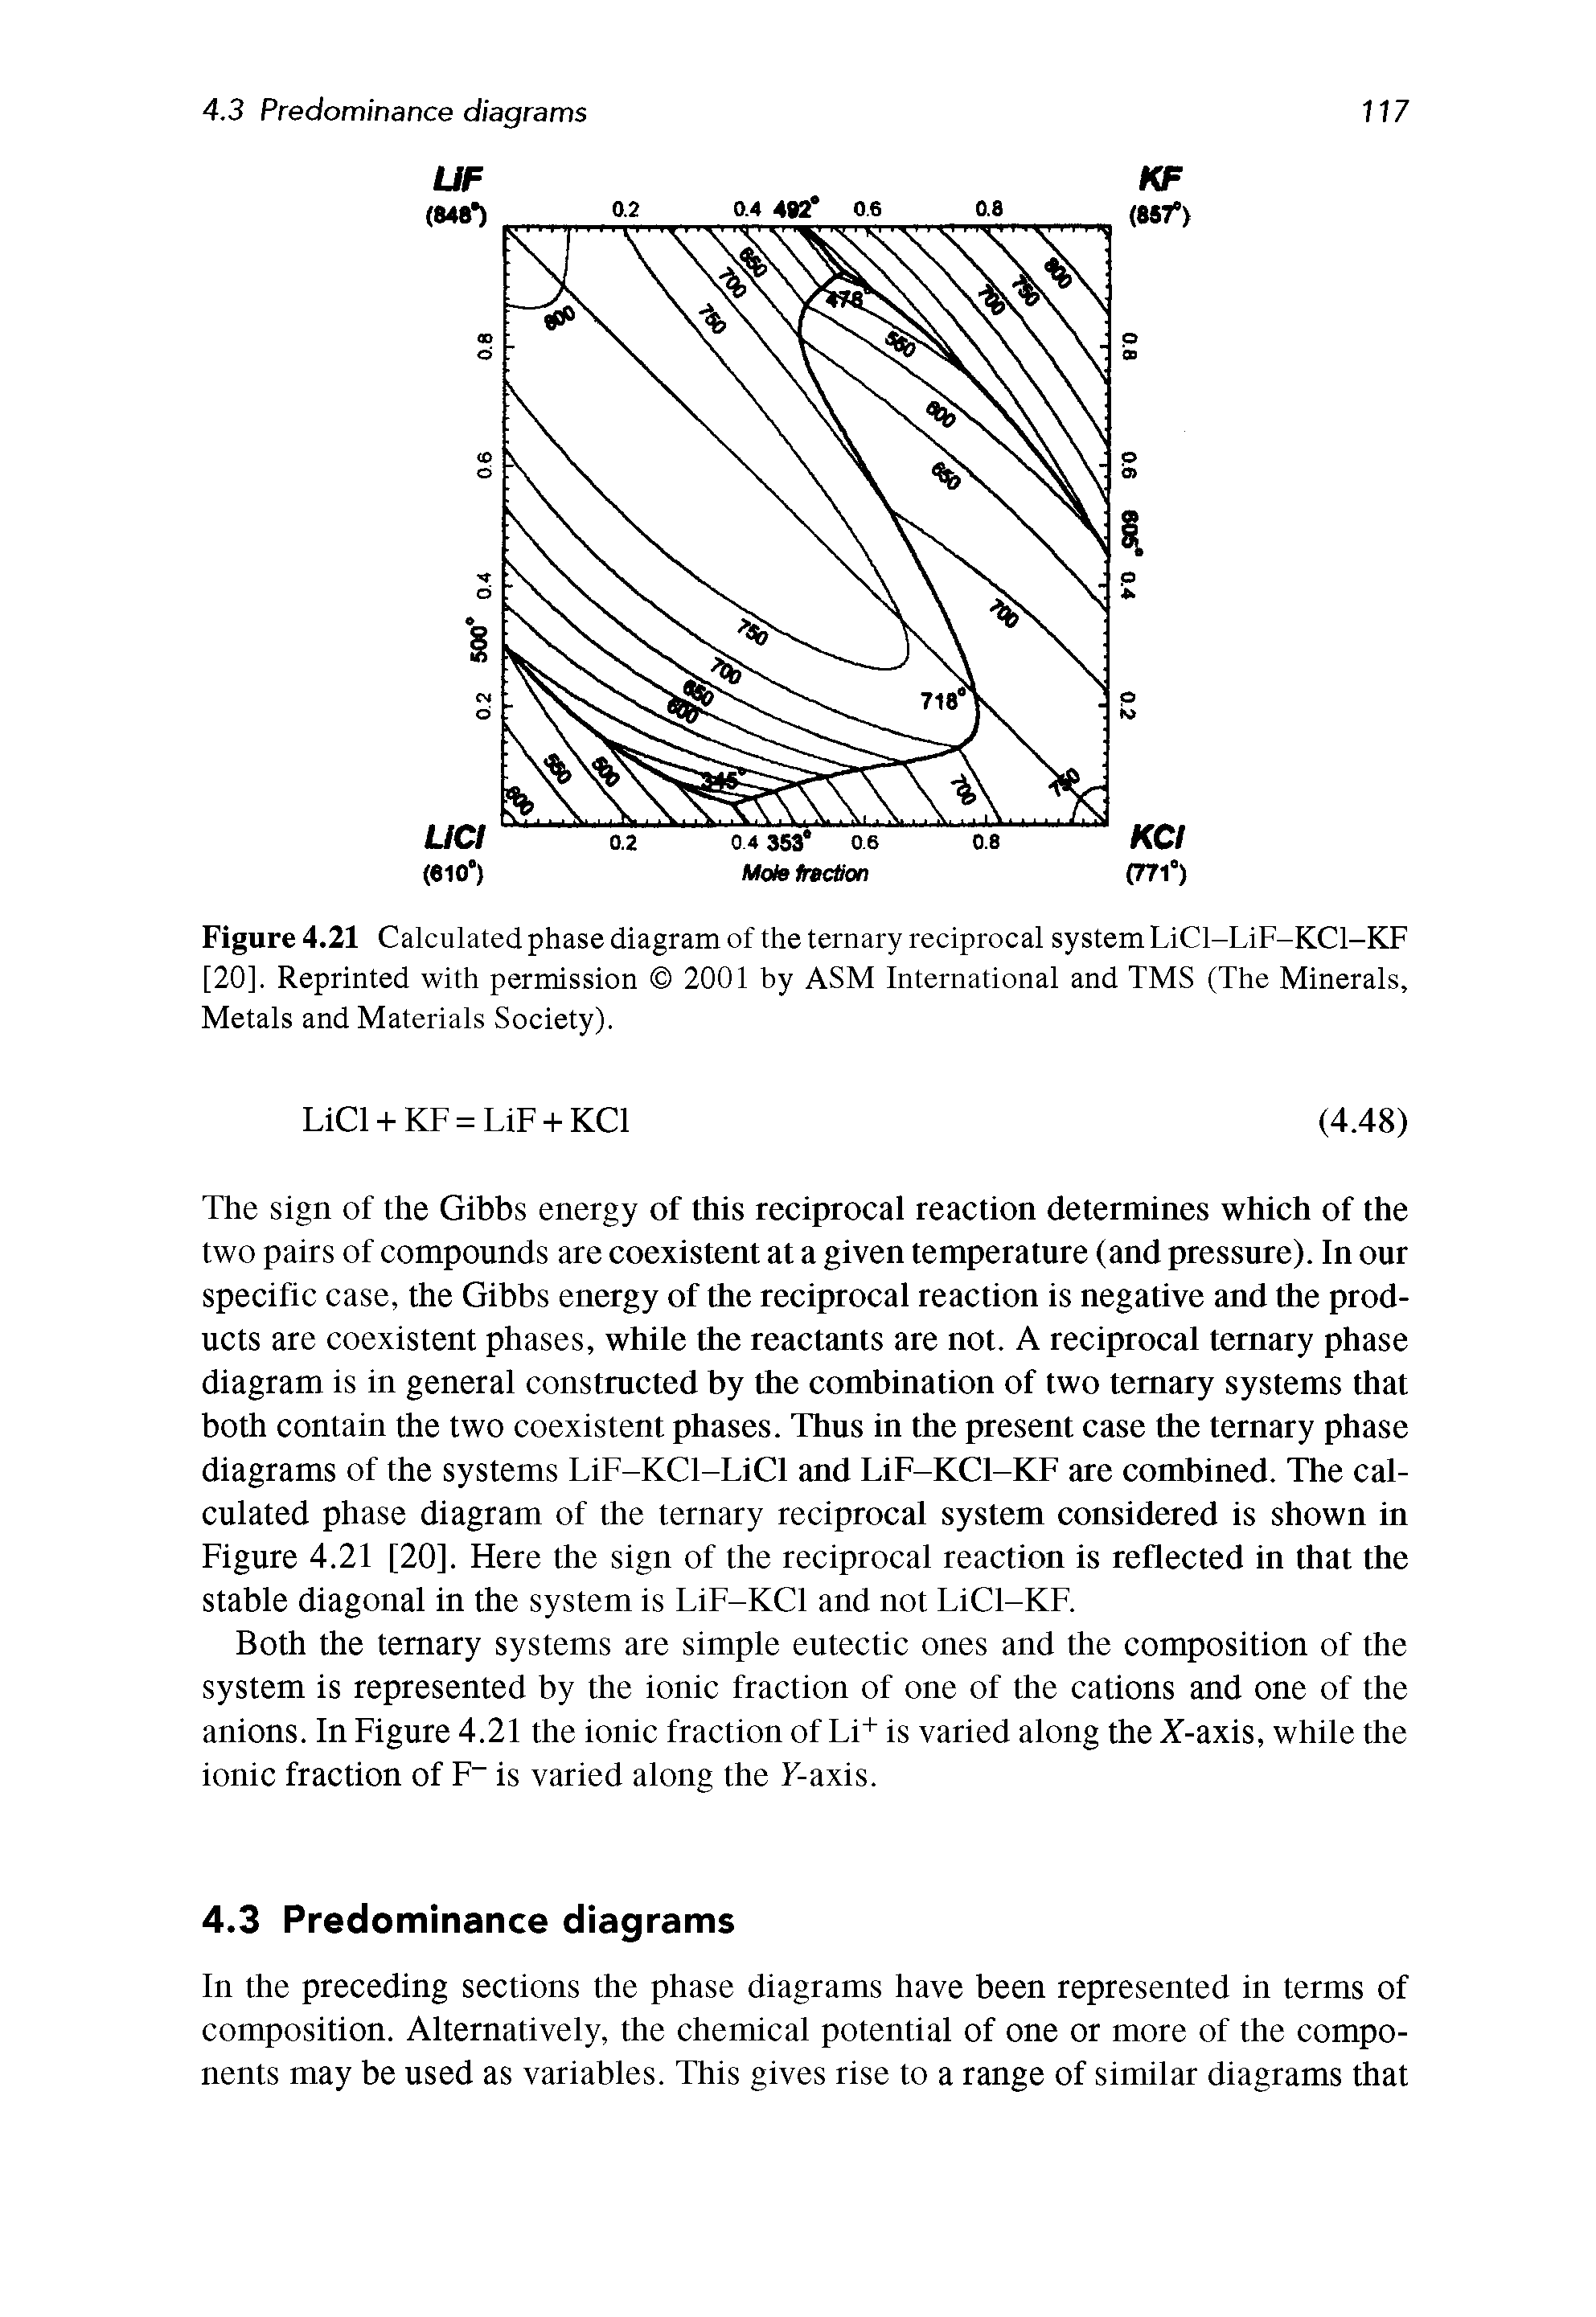 Figure 4.21 Calculated phase diagram of the ternary reciprocal system LiCl-LiF-KCl-KF [20], Reprinted with permission 2001 by ASM International and TMS (The Minerals, Metals and Materials Society).